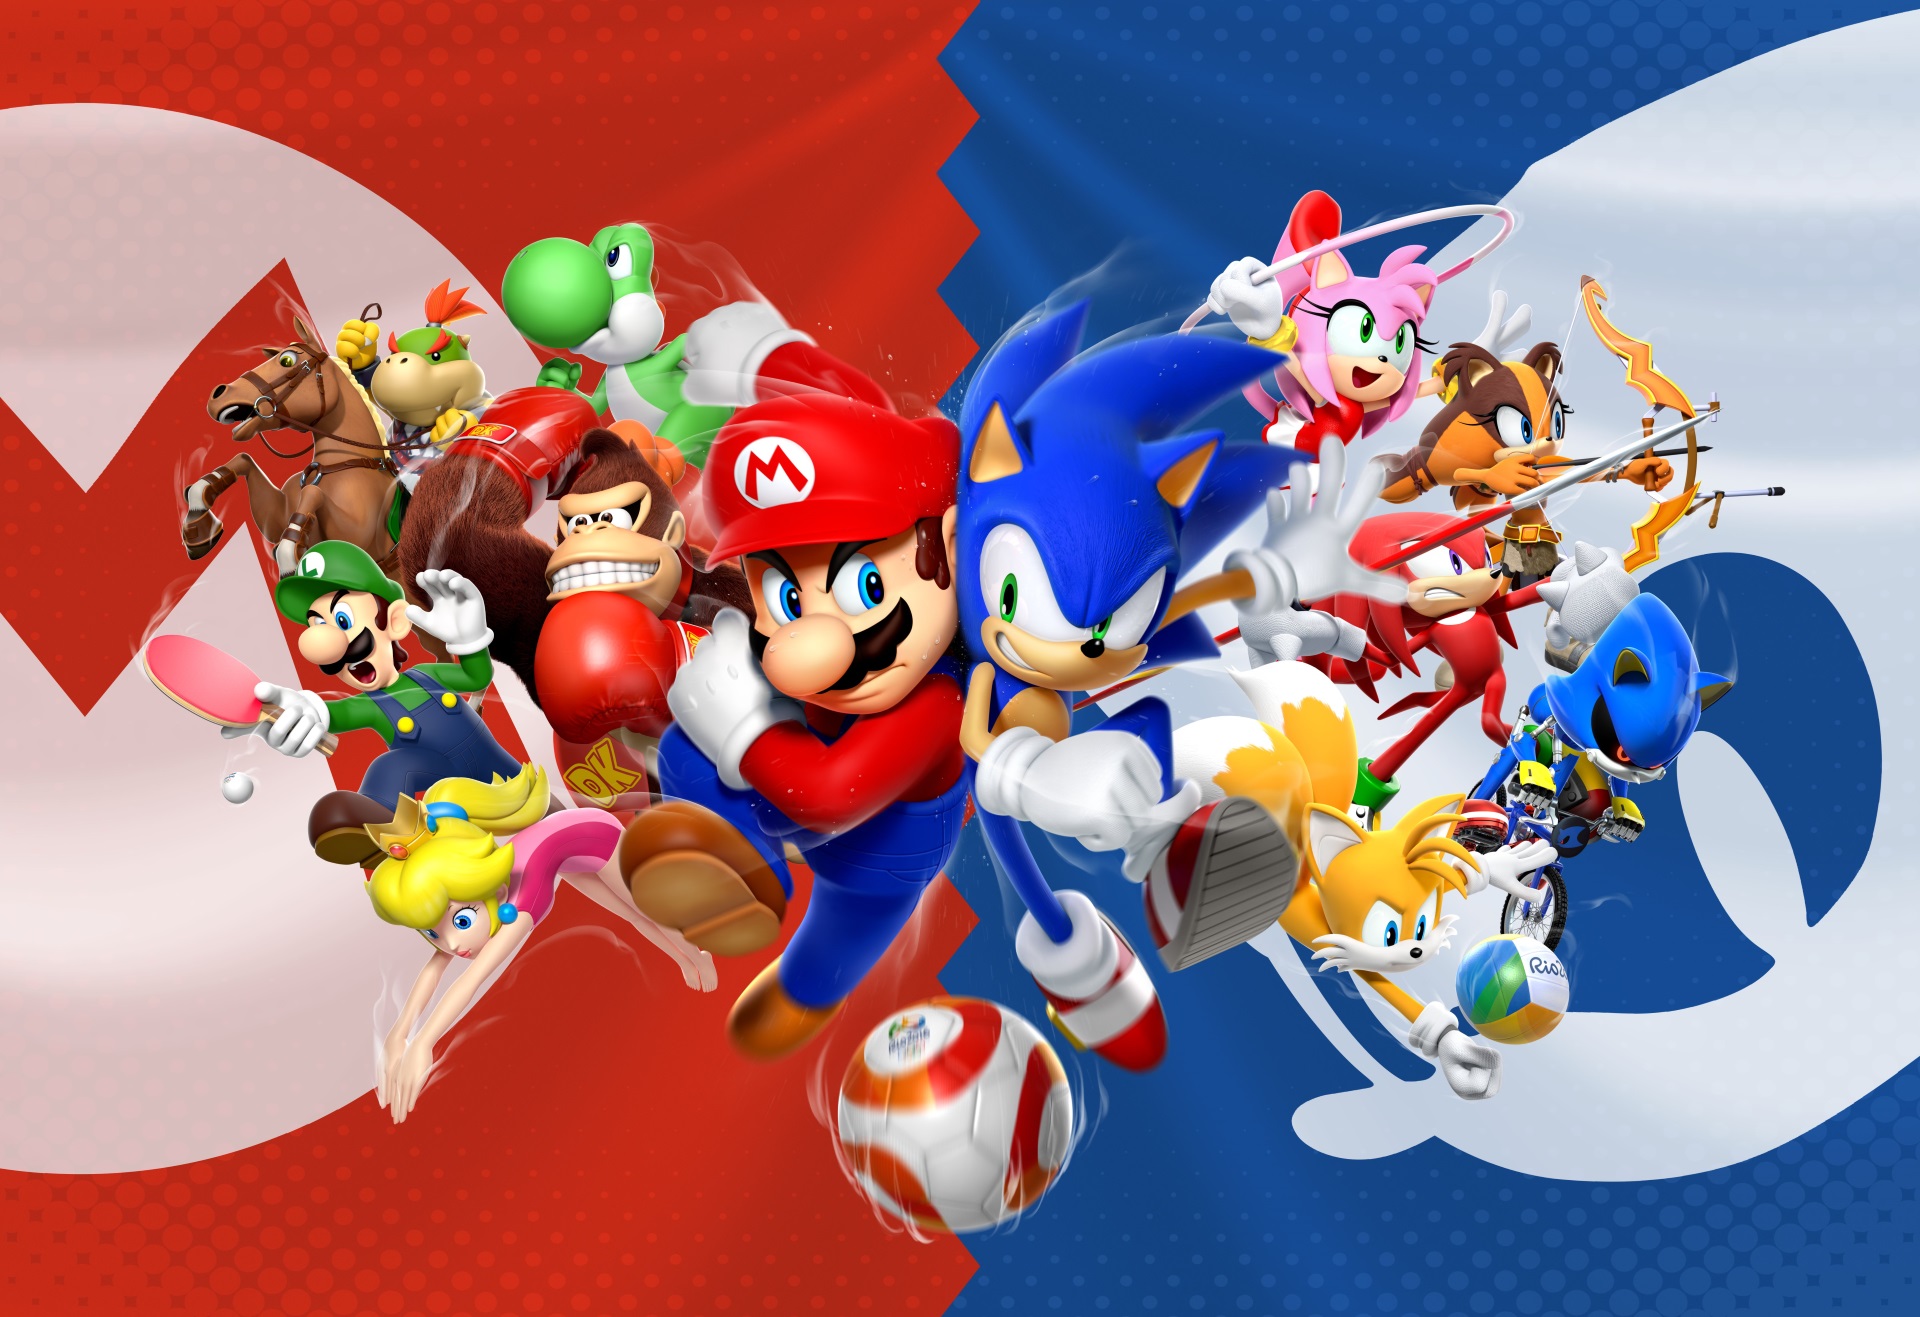 Mario & Sonic at the Rio 2016 Olympic Games | GodisaGeek.com